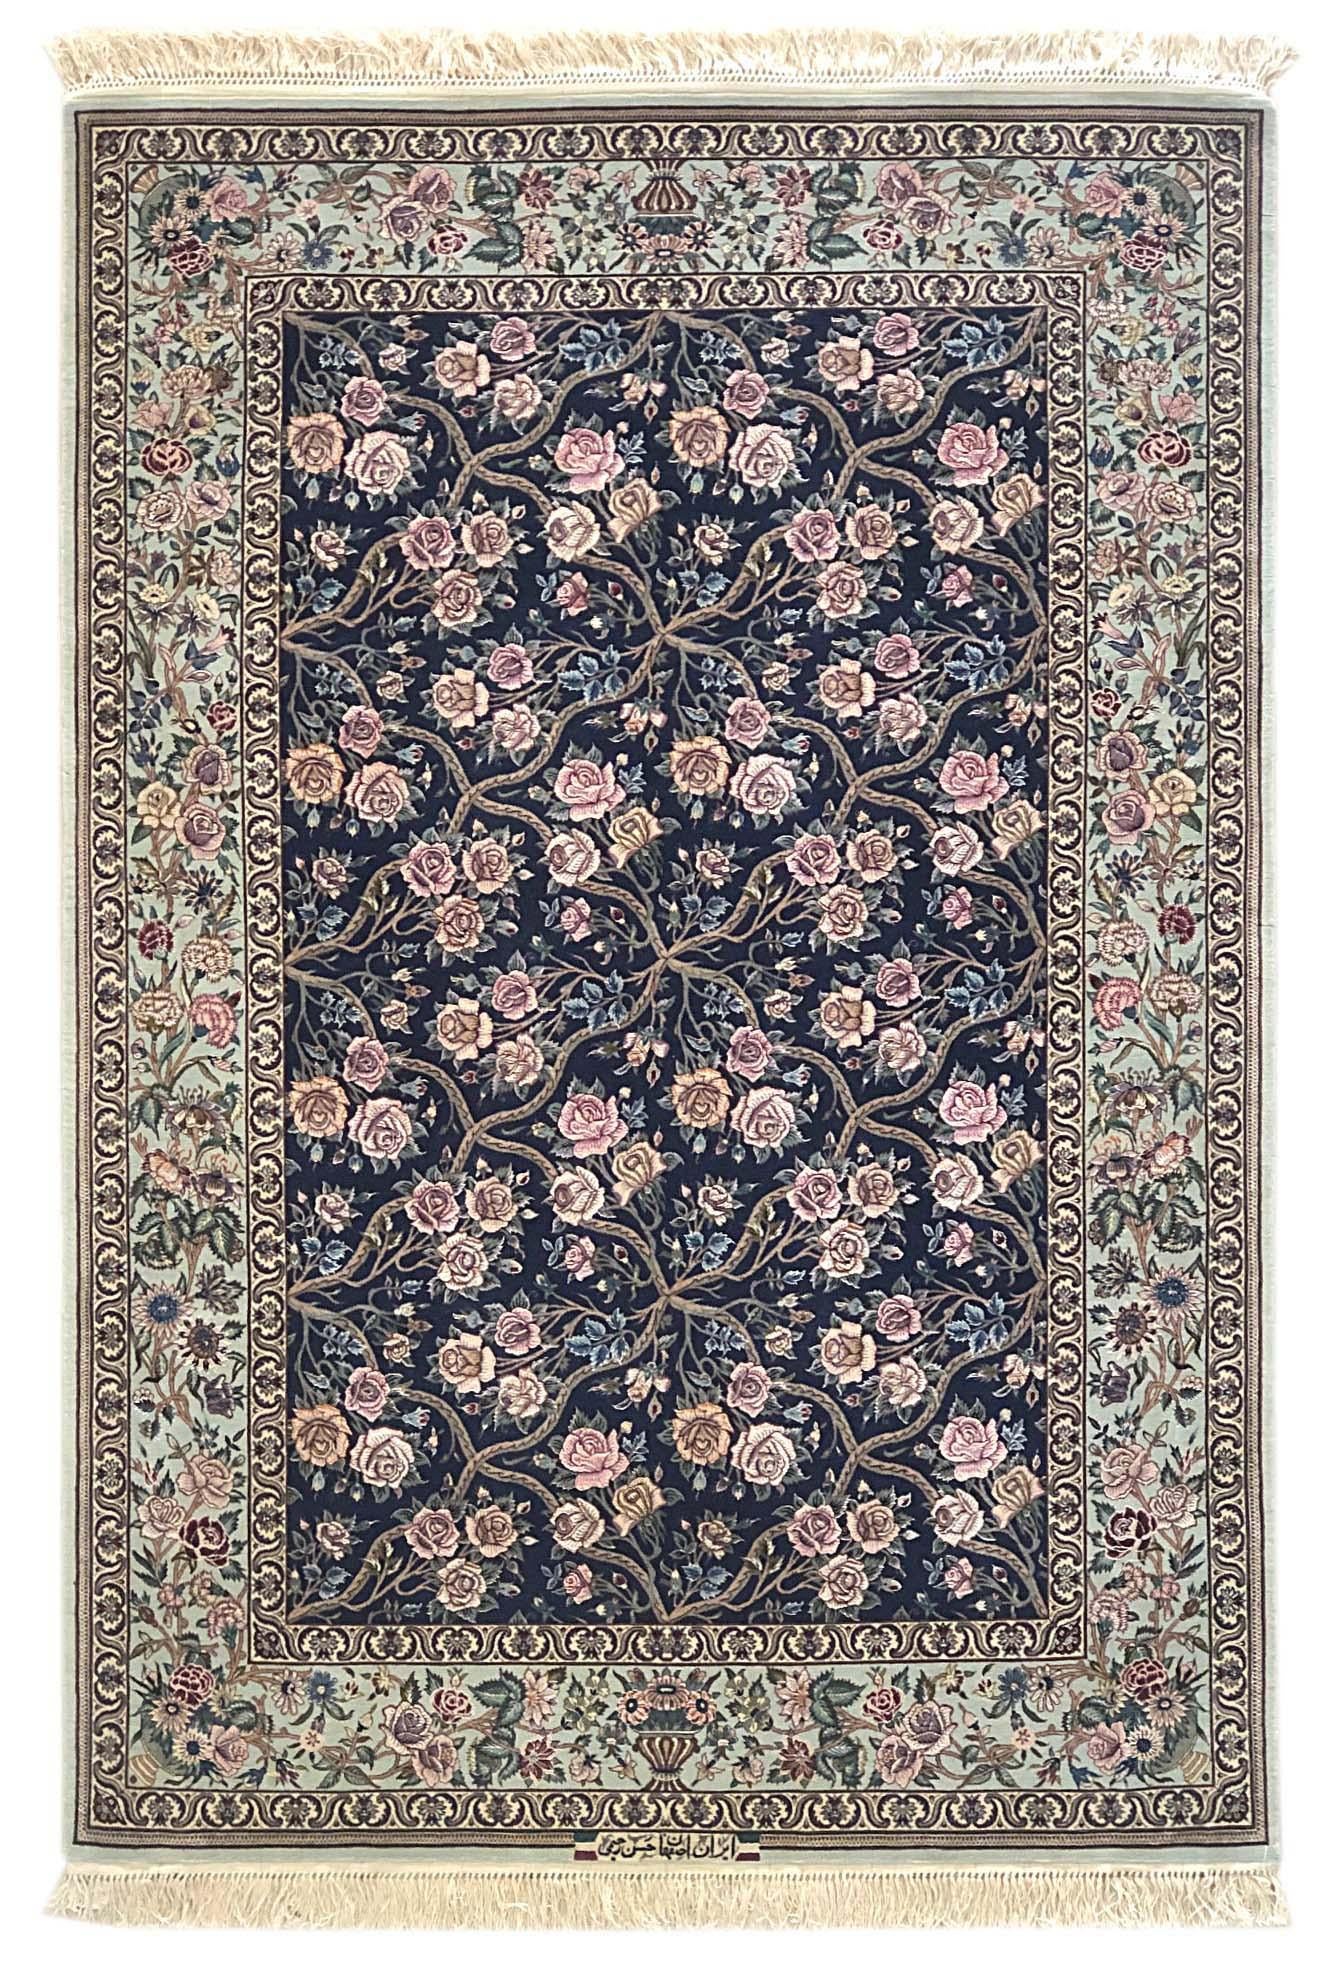 This authentic Persian Isfahan rug has wool and silk pile on silk foundation with an excellent condition. The design and color combination are absolutely magnificent and unique. This rug has signed by Hassan Rahimi who is one of the famous weavers